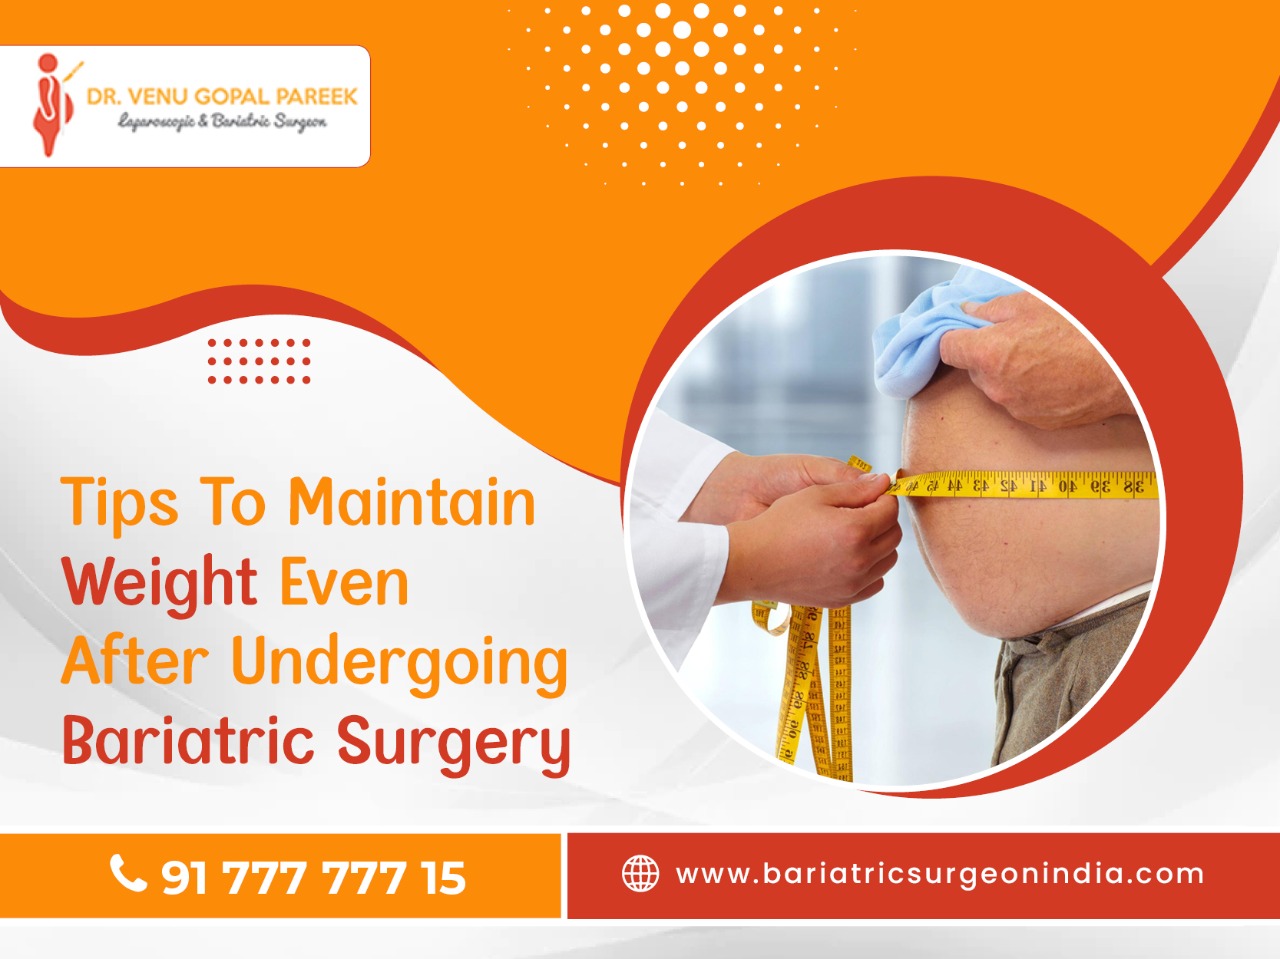 tips to maintain weight after bariatric surgery